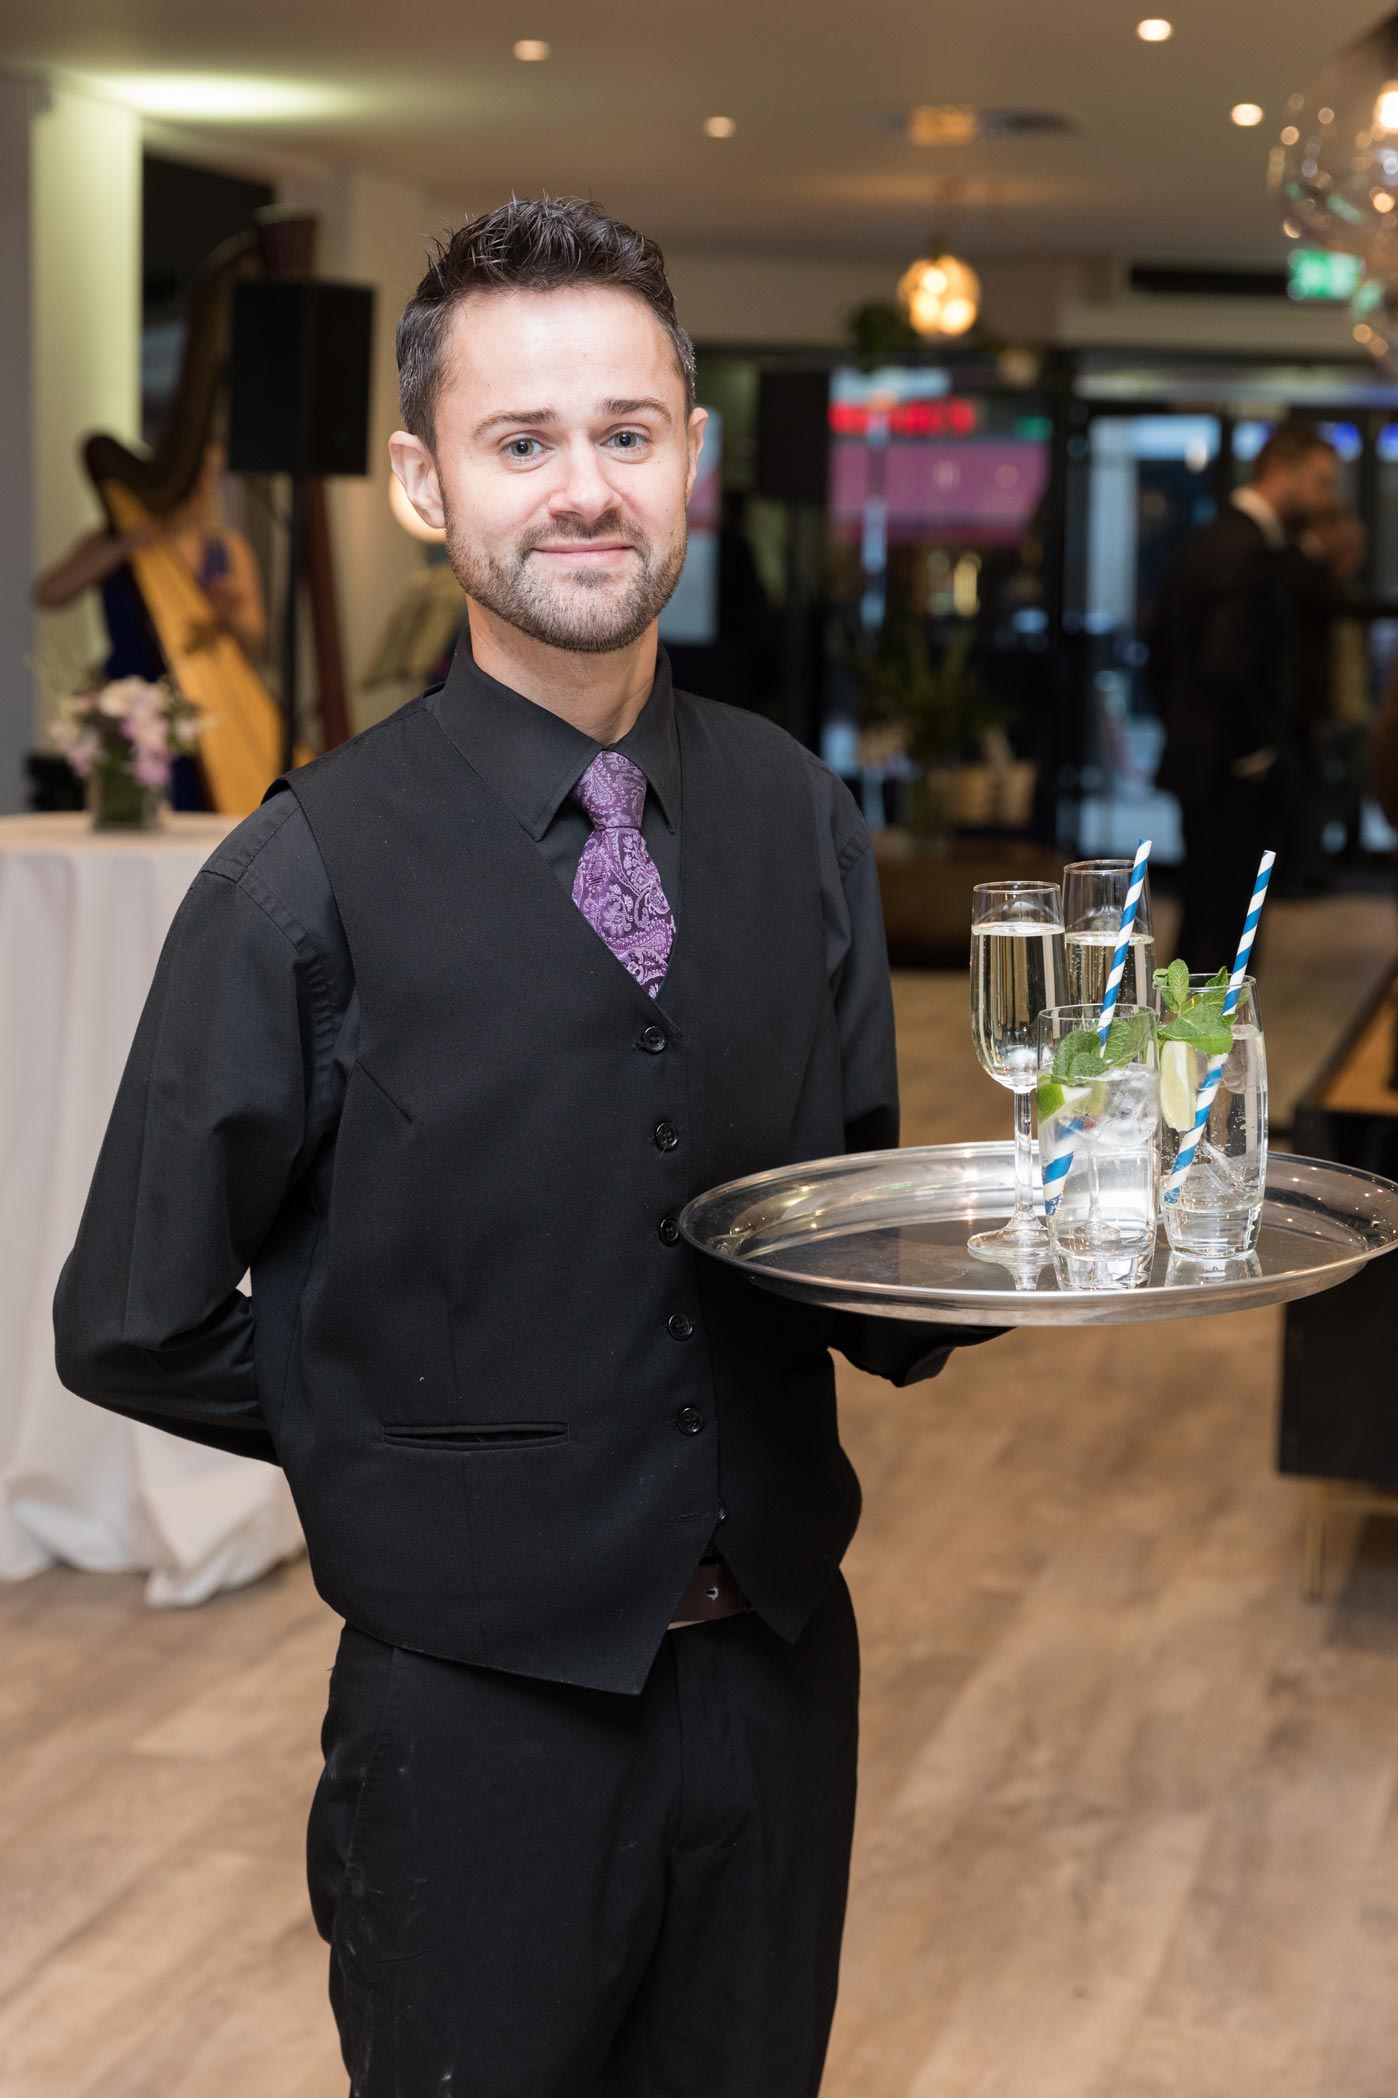 London corporate event photography in Croydon